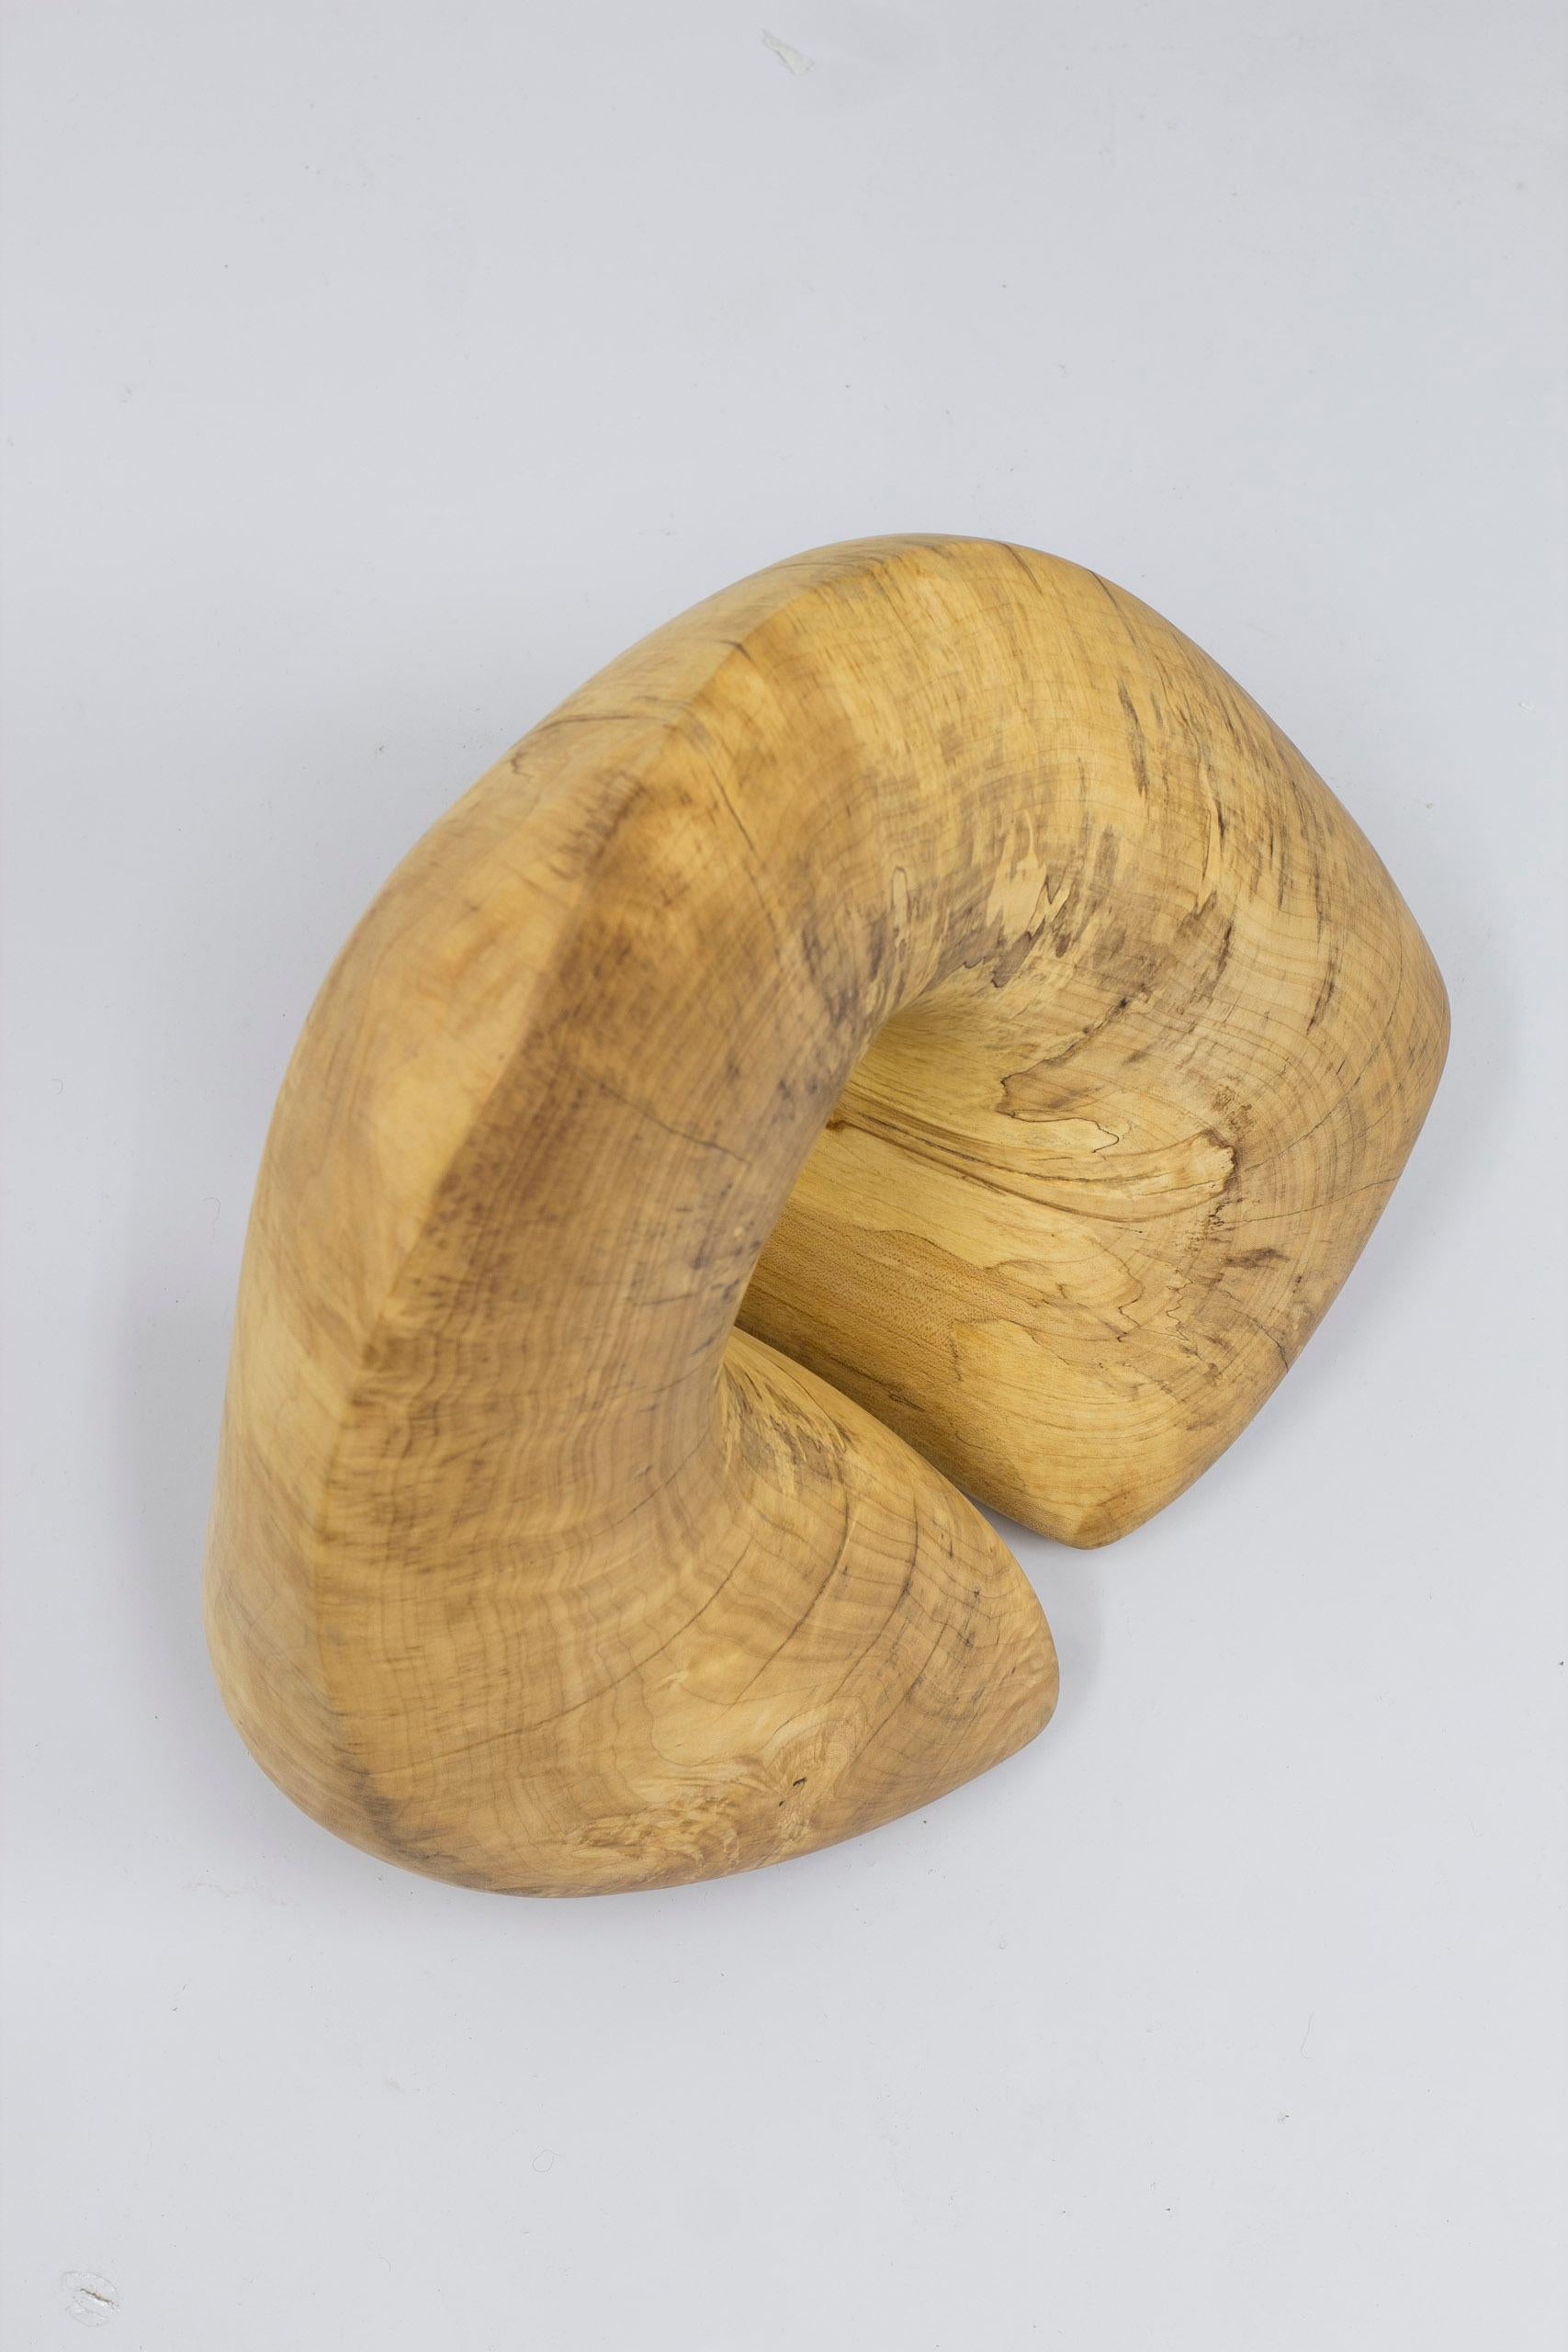 Danish free form sculpture in maple, Denmark, 1950-60s, Organic For Sale 3